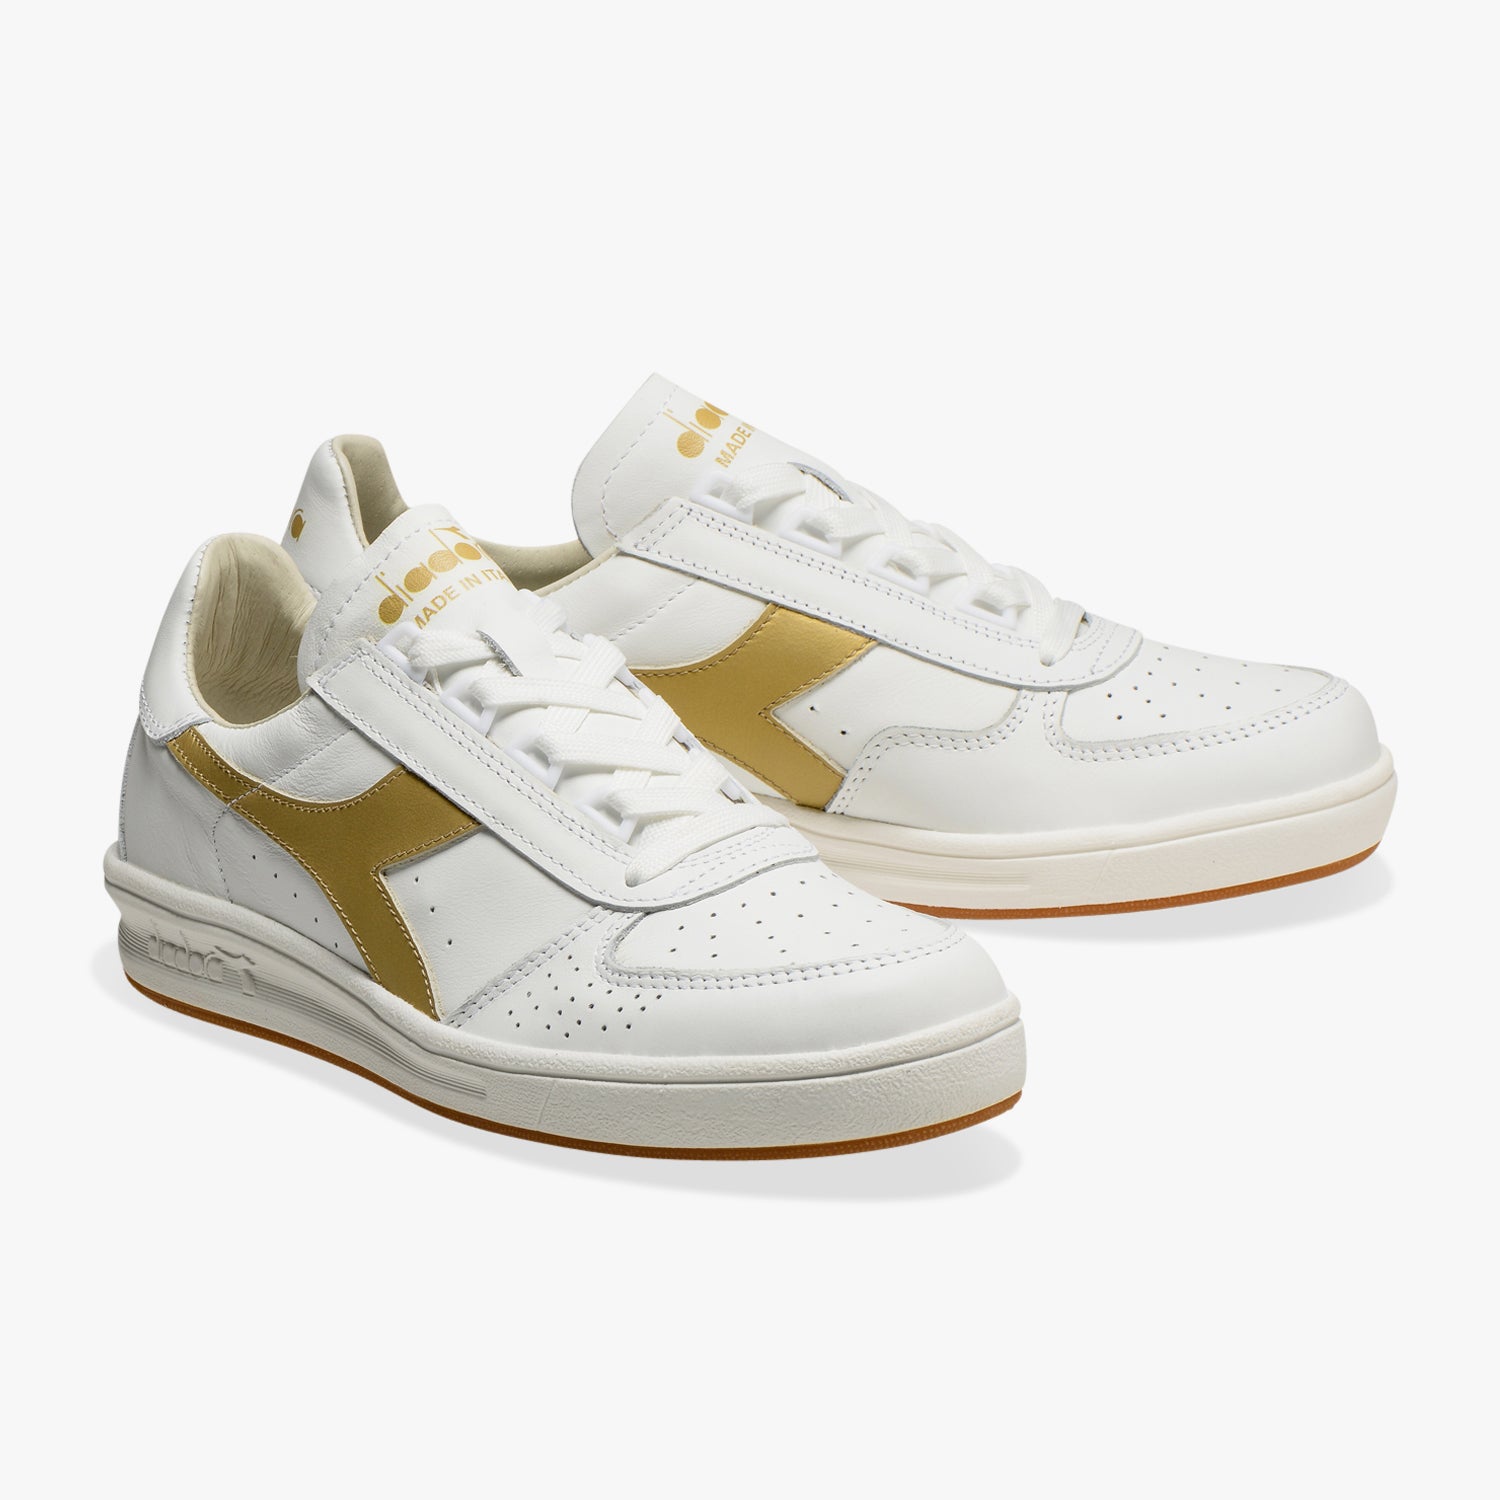 side by side view of white and gold B. elite h italia sport diadora shoes made in italy